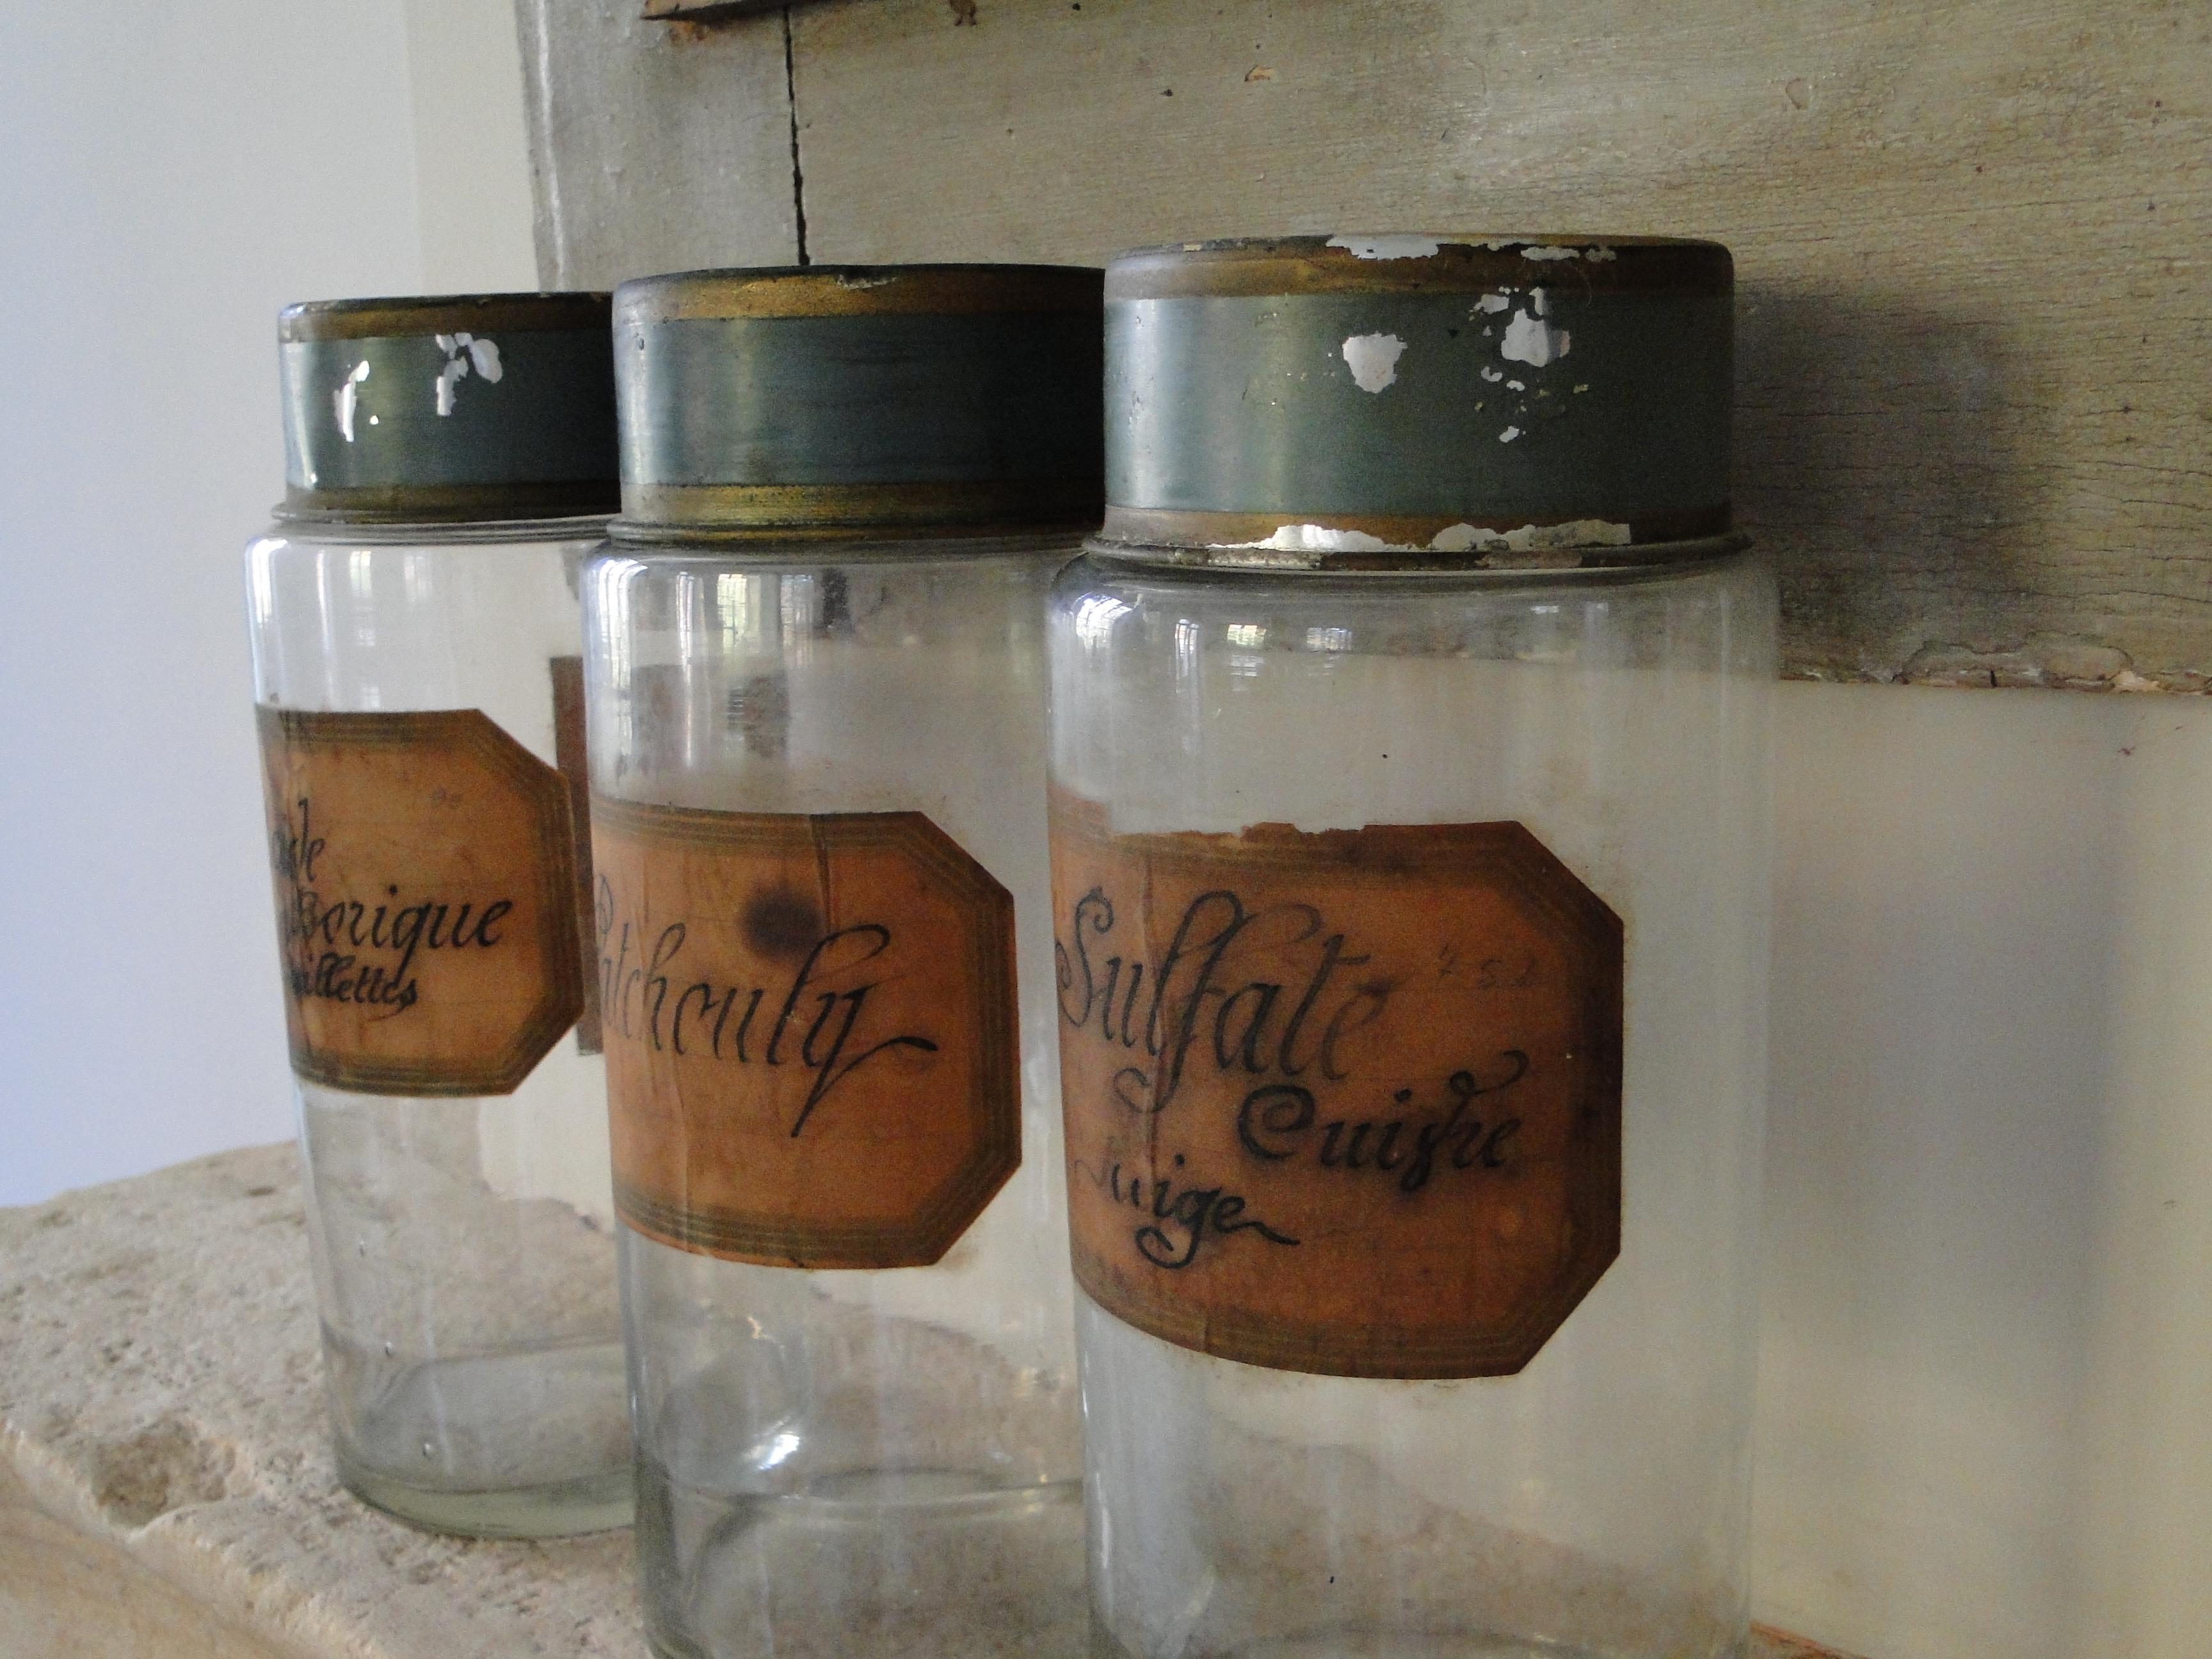 French apothecary glass jars with their handwritten label and painted tin lid.